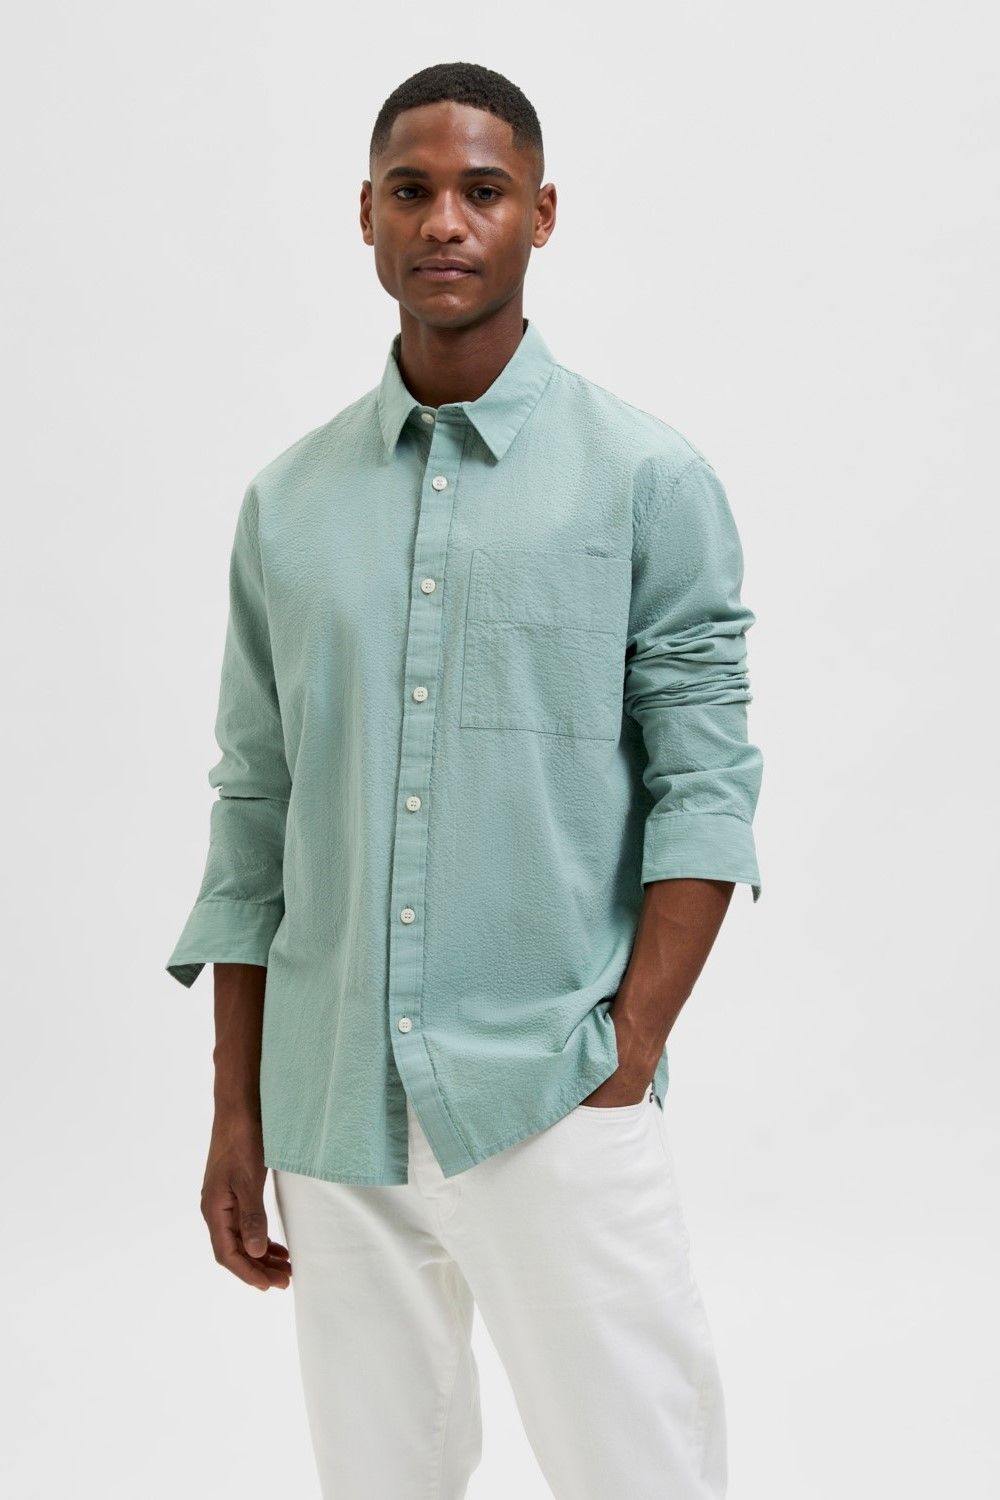 Selected  Homme chemise Vert hommes (SLCT/Man-Chemise cool unie - REGAXEL chemise vert menthe) - Marine | Much more than shoes